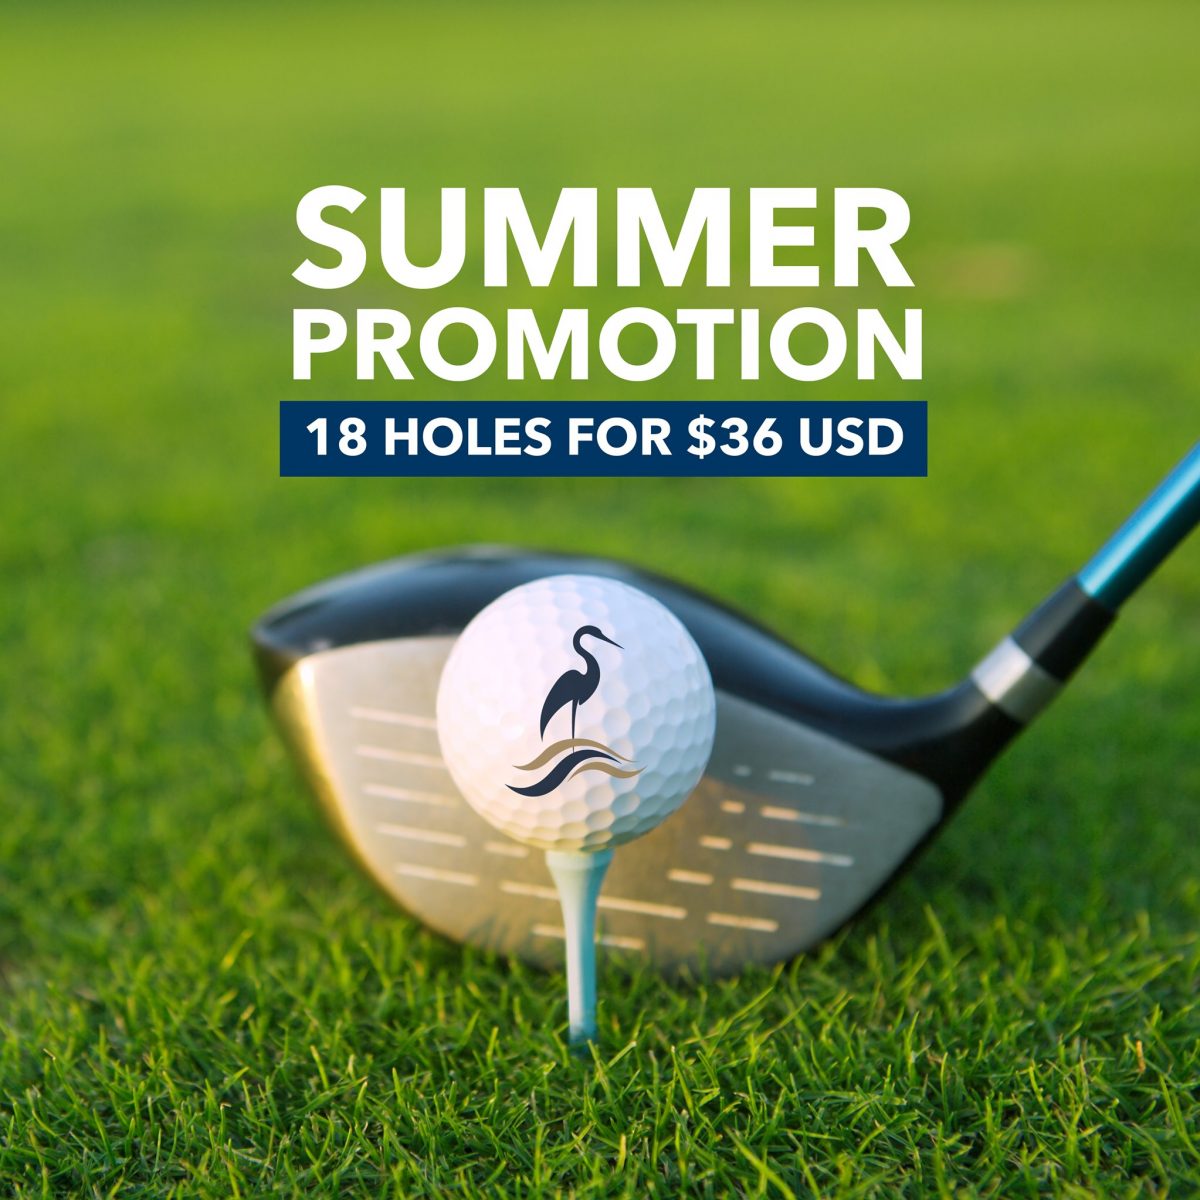 The-Club-summer-promo-2020-1-1200x1200 August, Golf & Rocky Point!